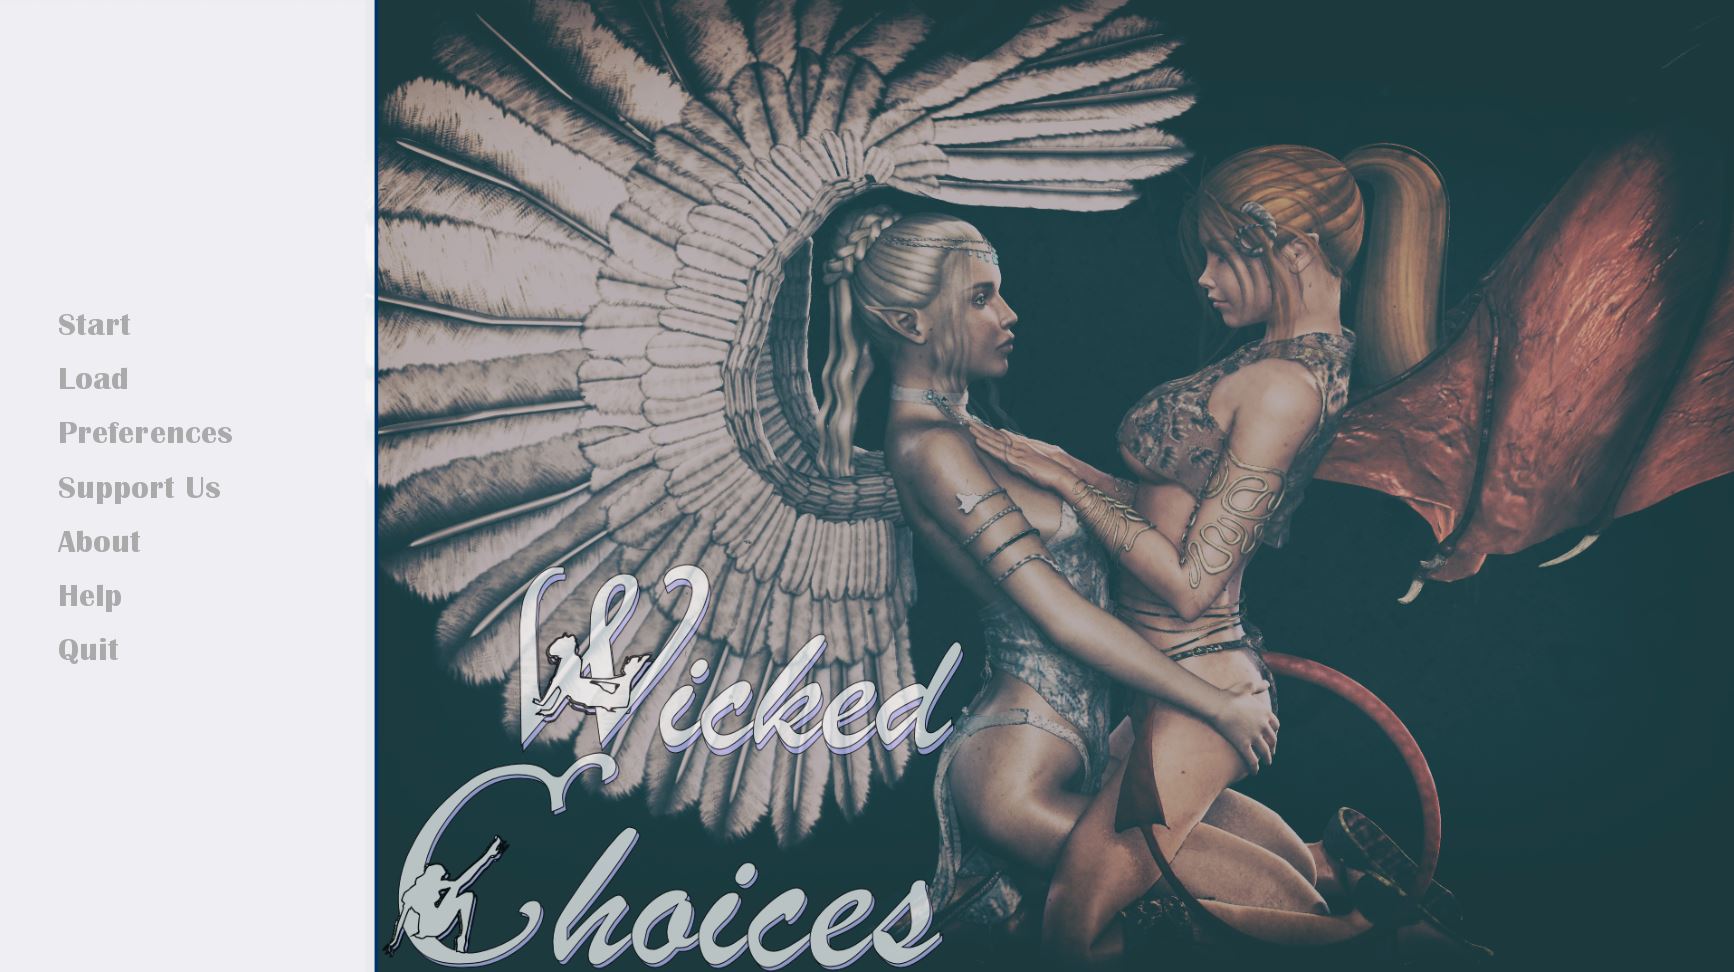 Wicked Choices – Version 1.0 - Patreon incest hentai game 4